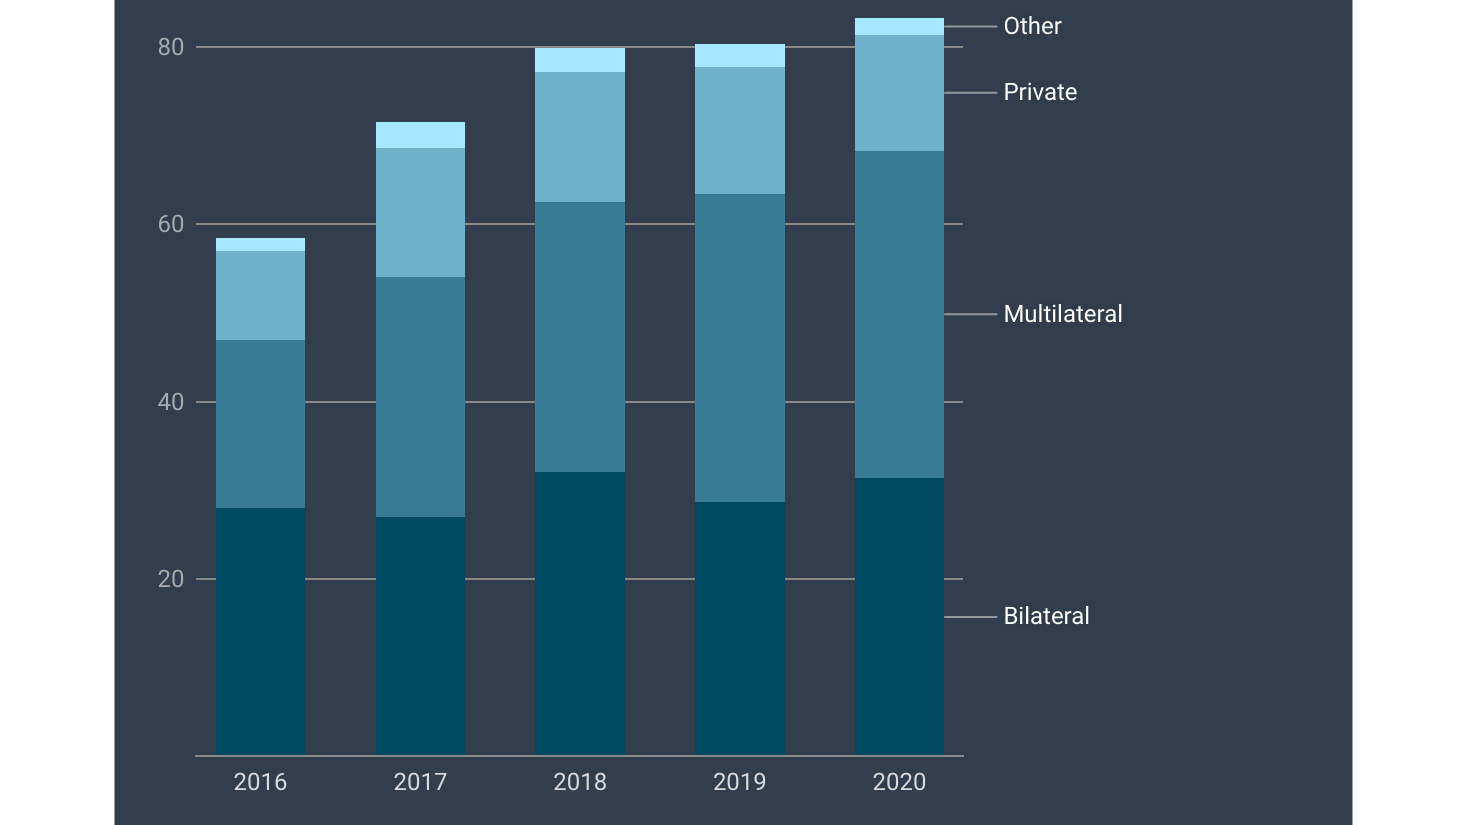 graph showing breakdown in climate finance between private, multilateral and bilateral funding in $bn between 2016 and 2020